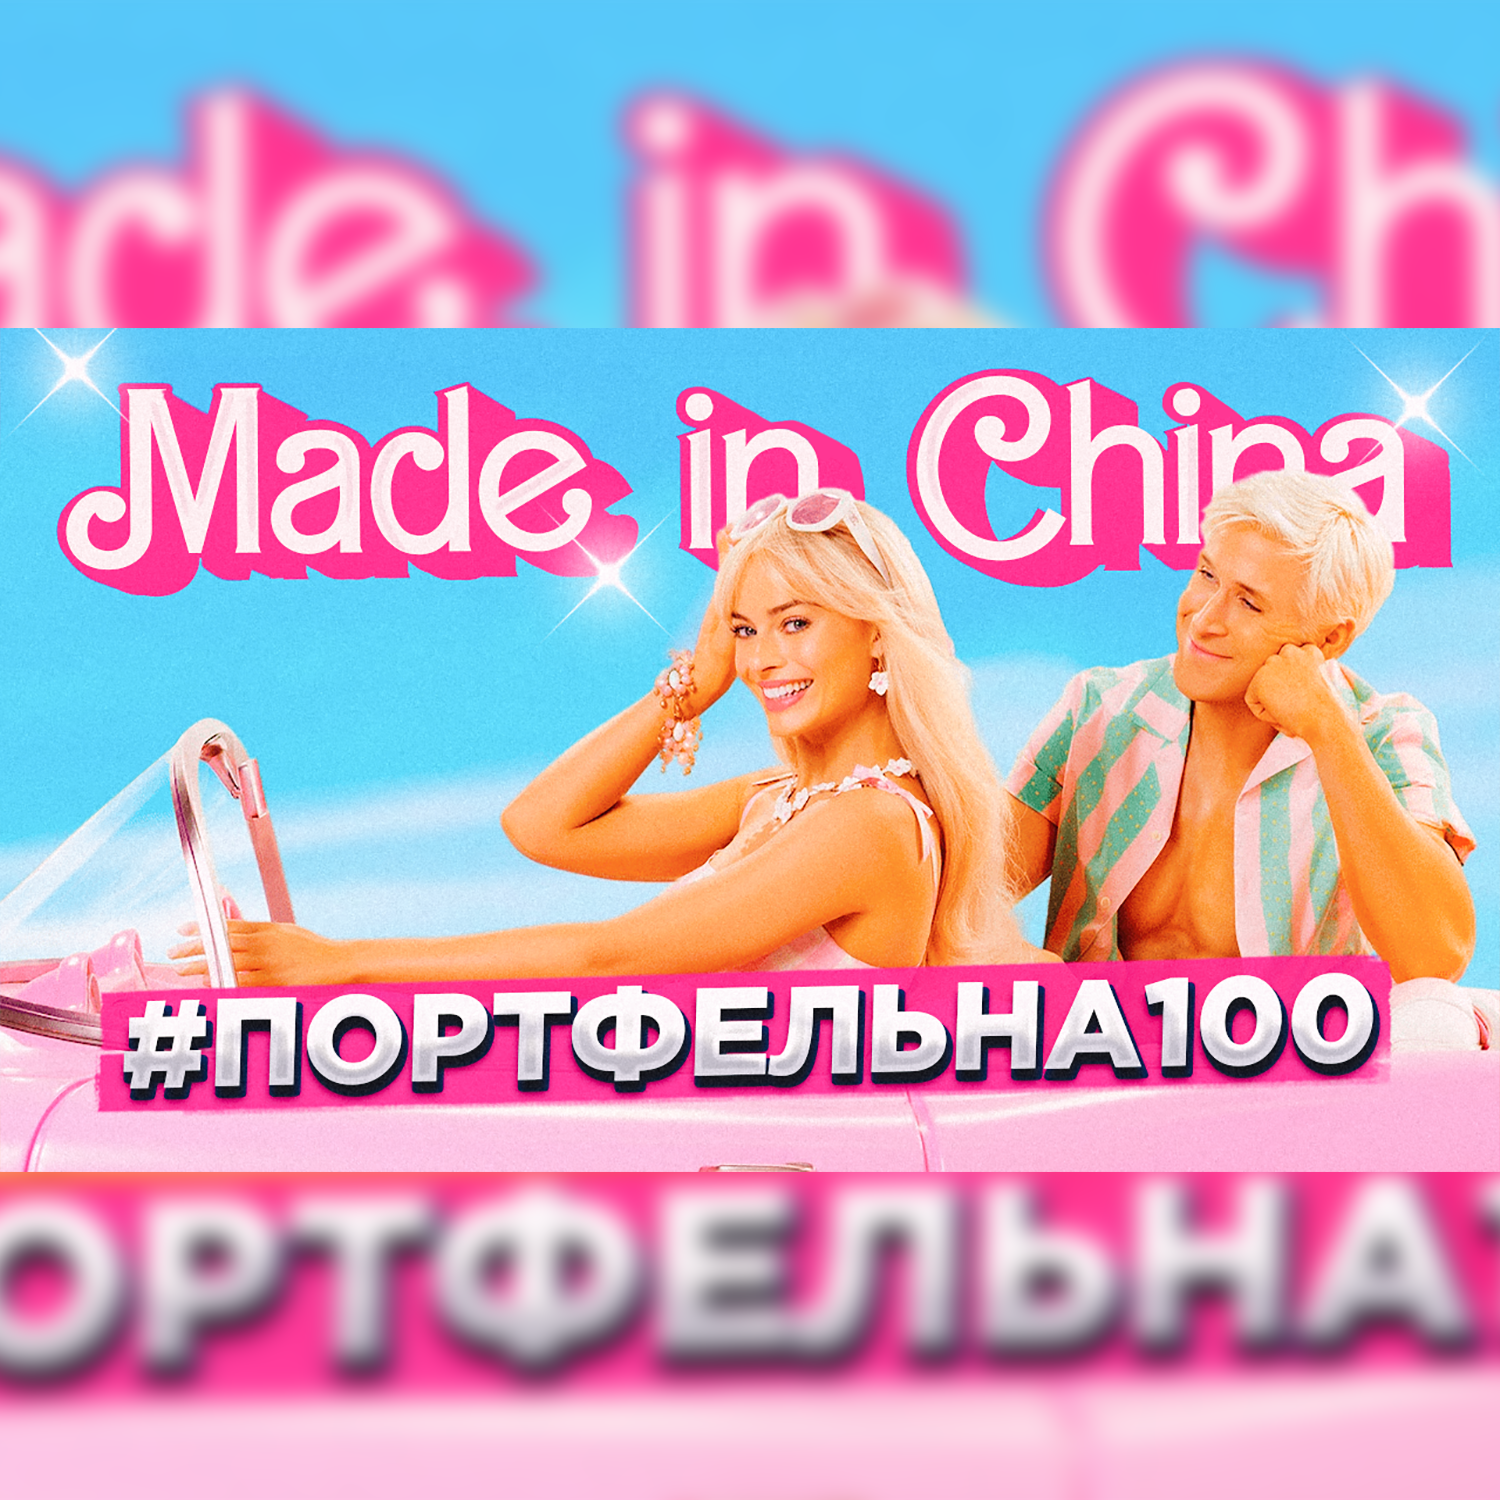 Made in china #Портфельна100 podcast poster